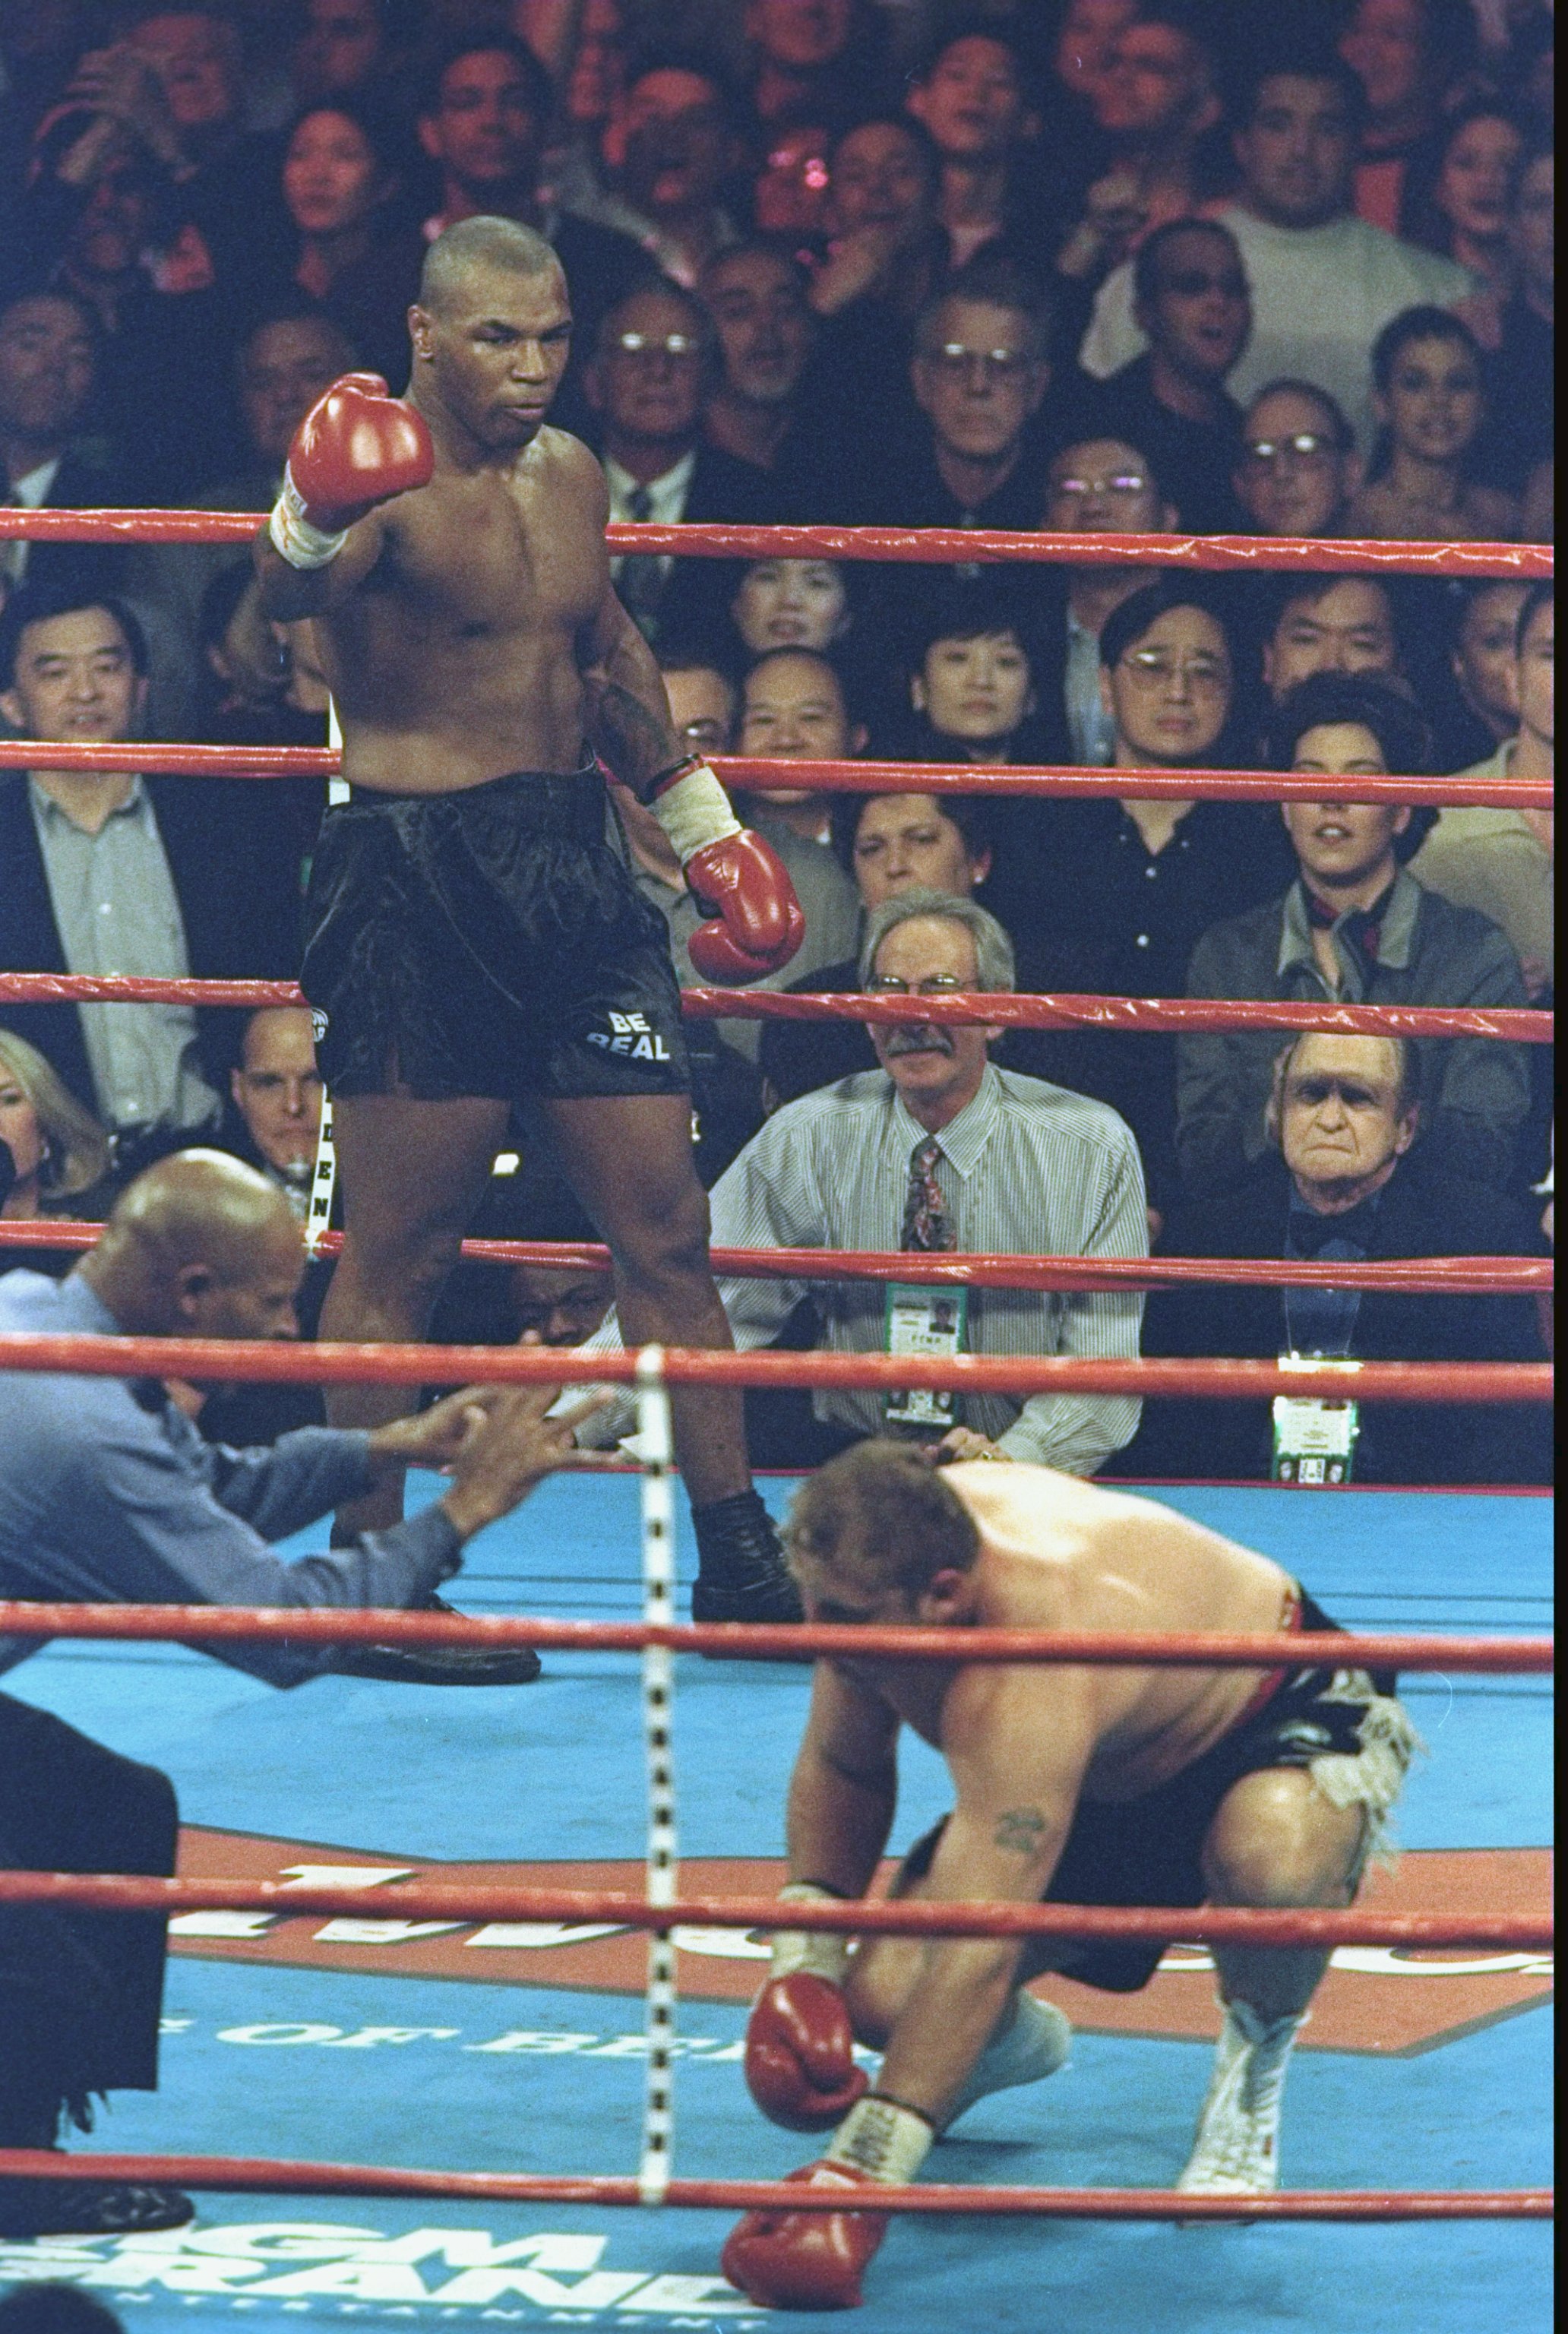 16 Jan 1999: Referee Richard Steele counts out Francois Botha in the fifth round during his first fight against Mike Tyson at the MGM Grand Garden Arena in Las Vegas, Nevada. Tyson defeated Botha by a counted out in the fifth round by the referee.